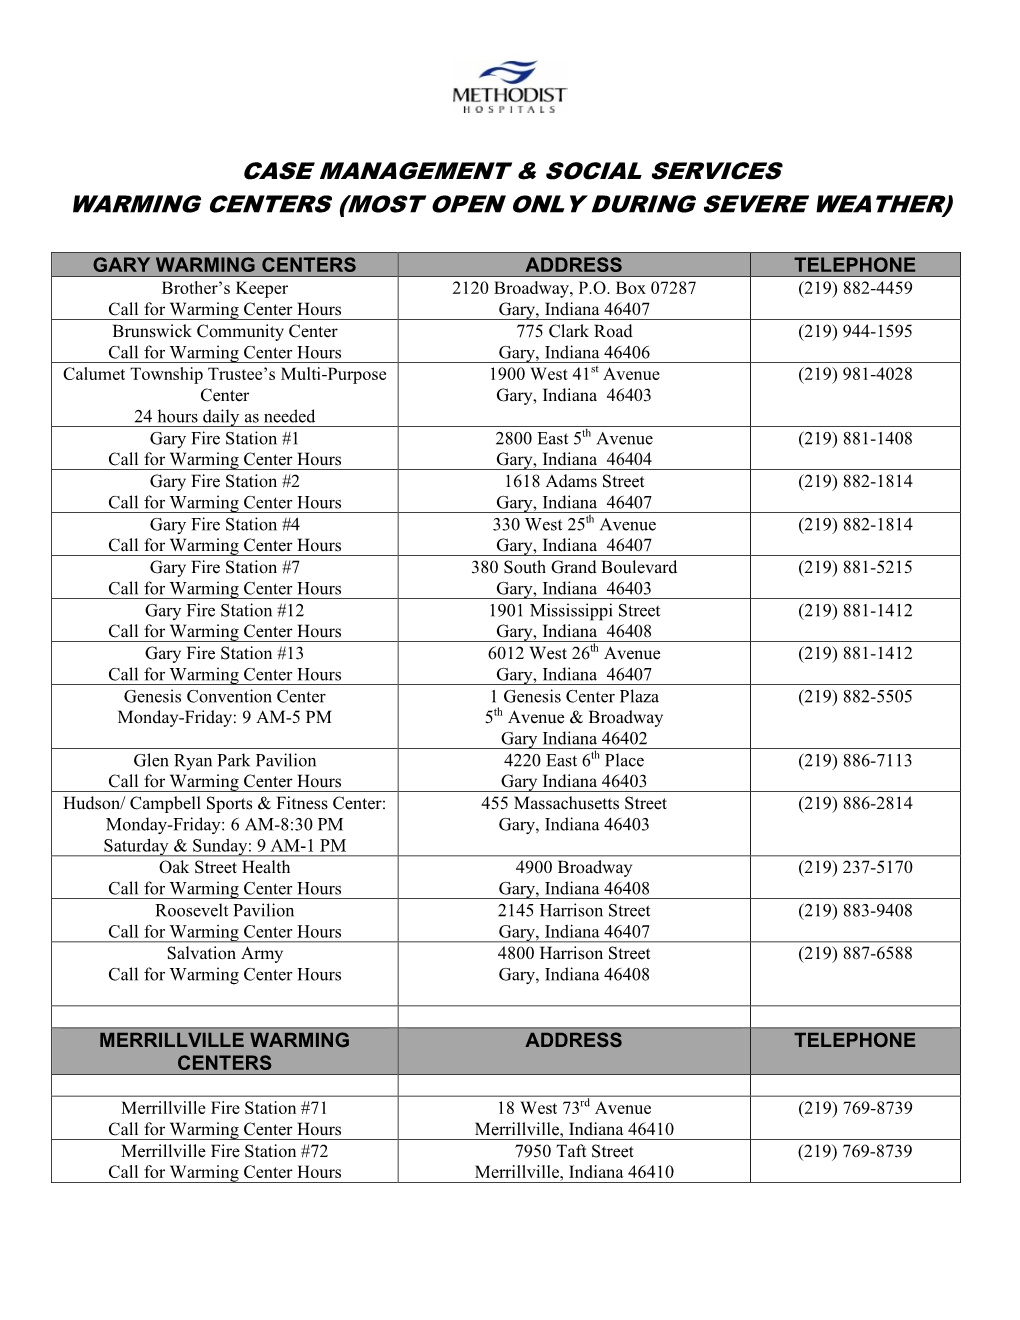 Case Management & Social Services Warming Centers (Most Open Only